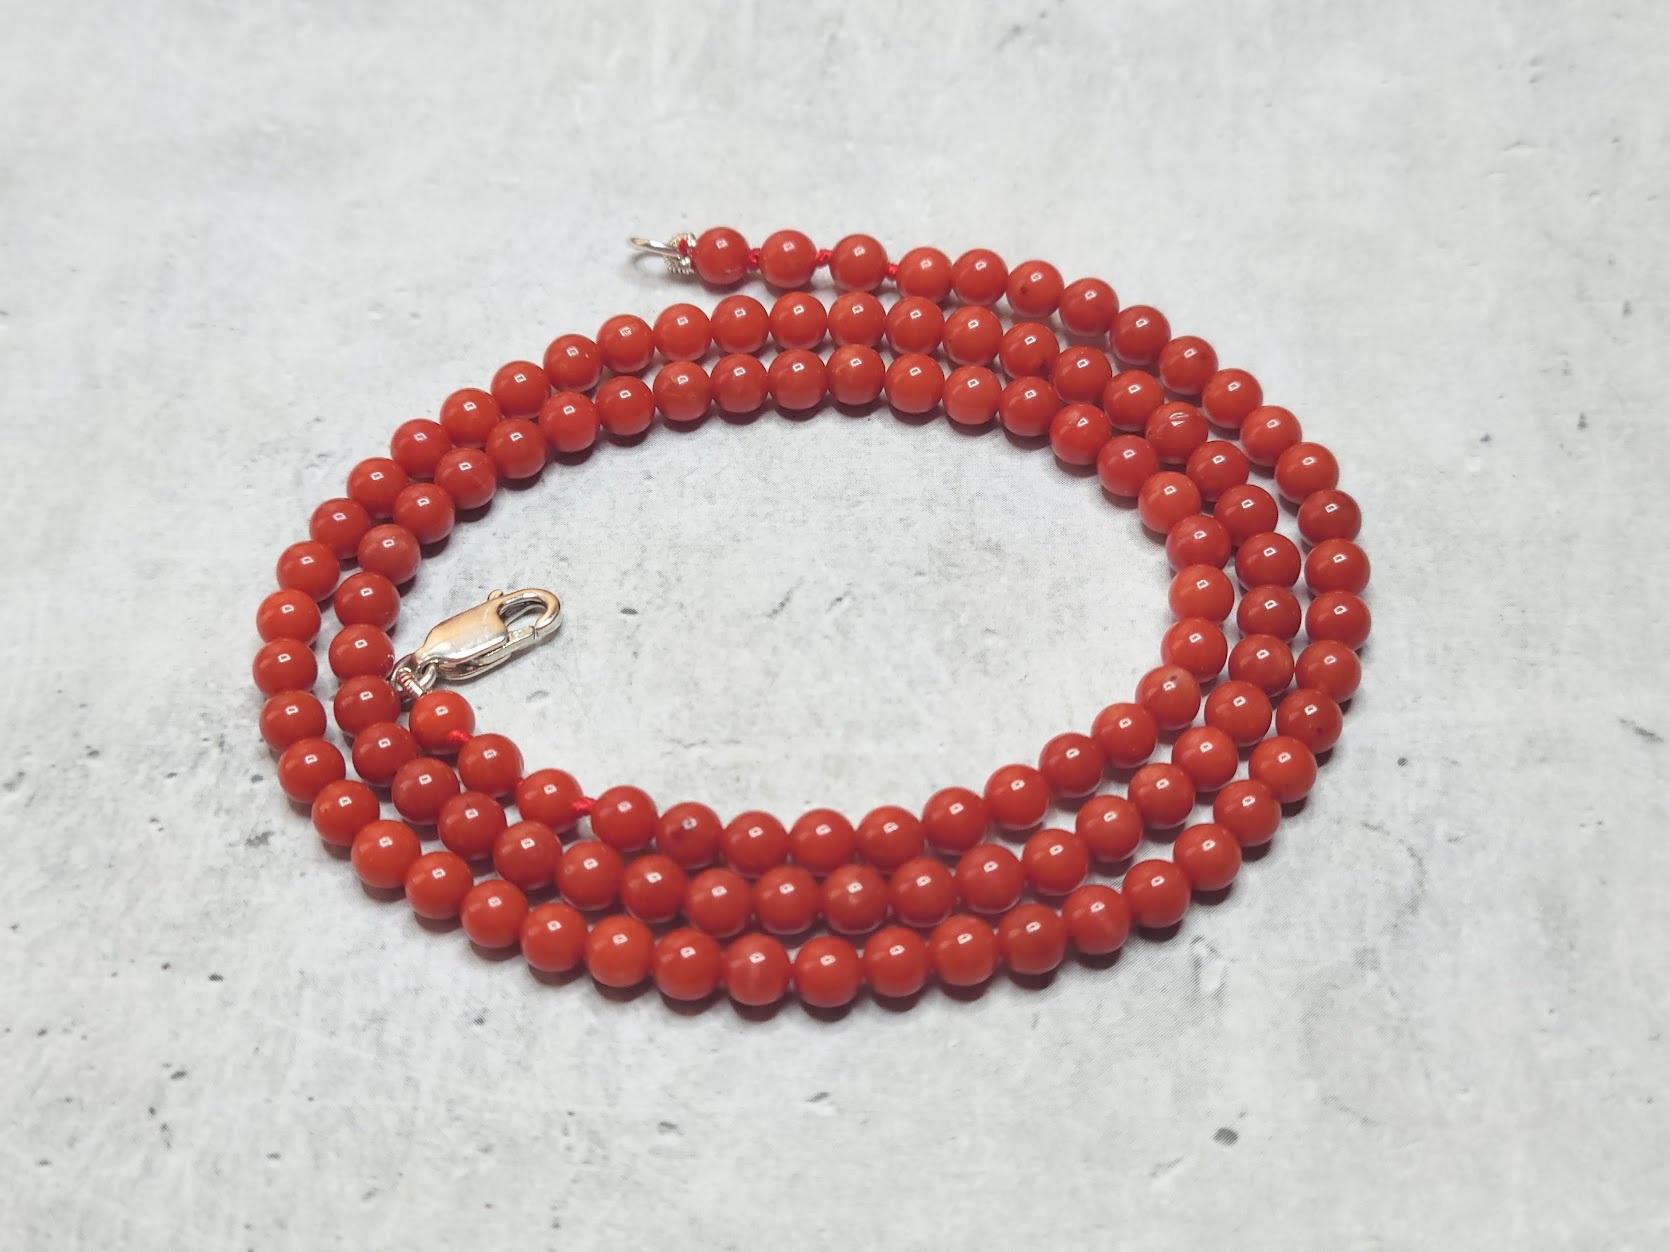 Clothes, and especially jewelry, affect our mood. By wearing a vintage coral necklace, you agree in advance that today is not the time to worry about anything.

The length of the necklace is 18 inches ( 45.7 cm).
The size of the smooth round coral